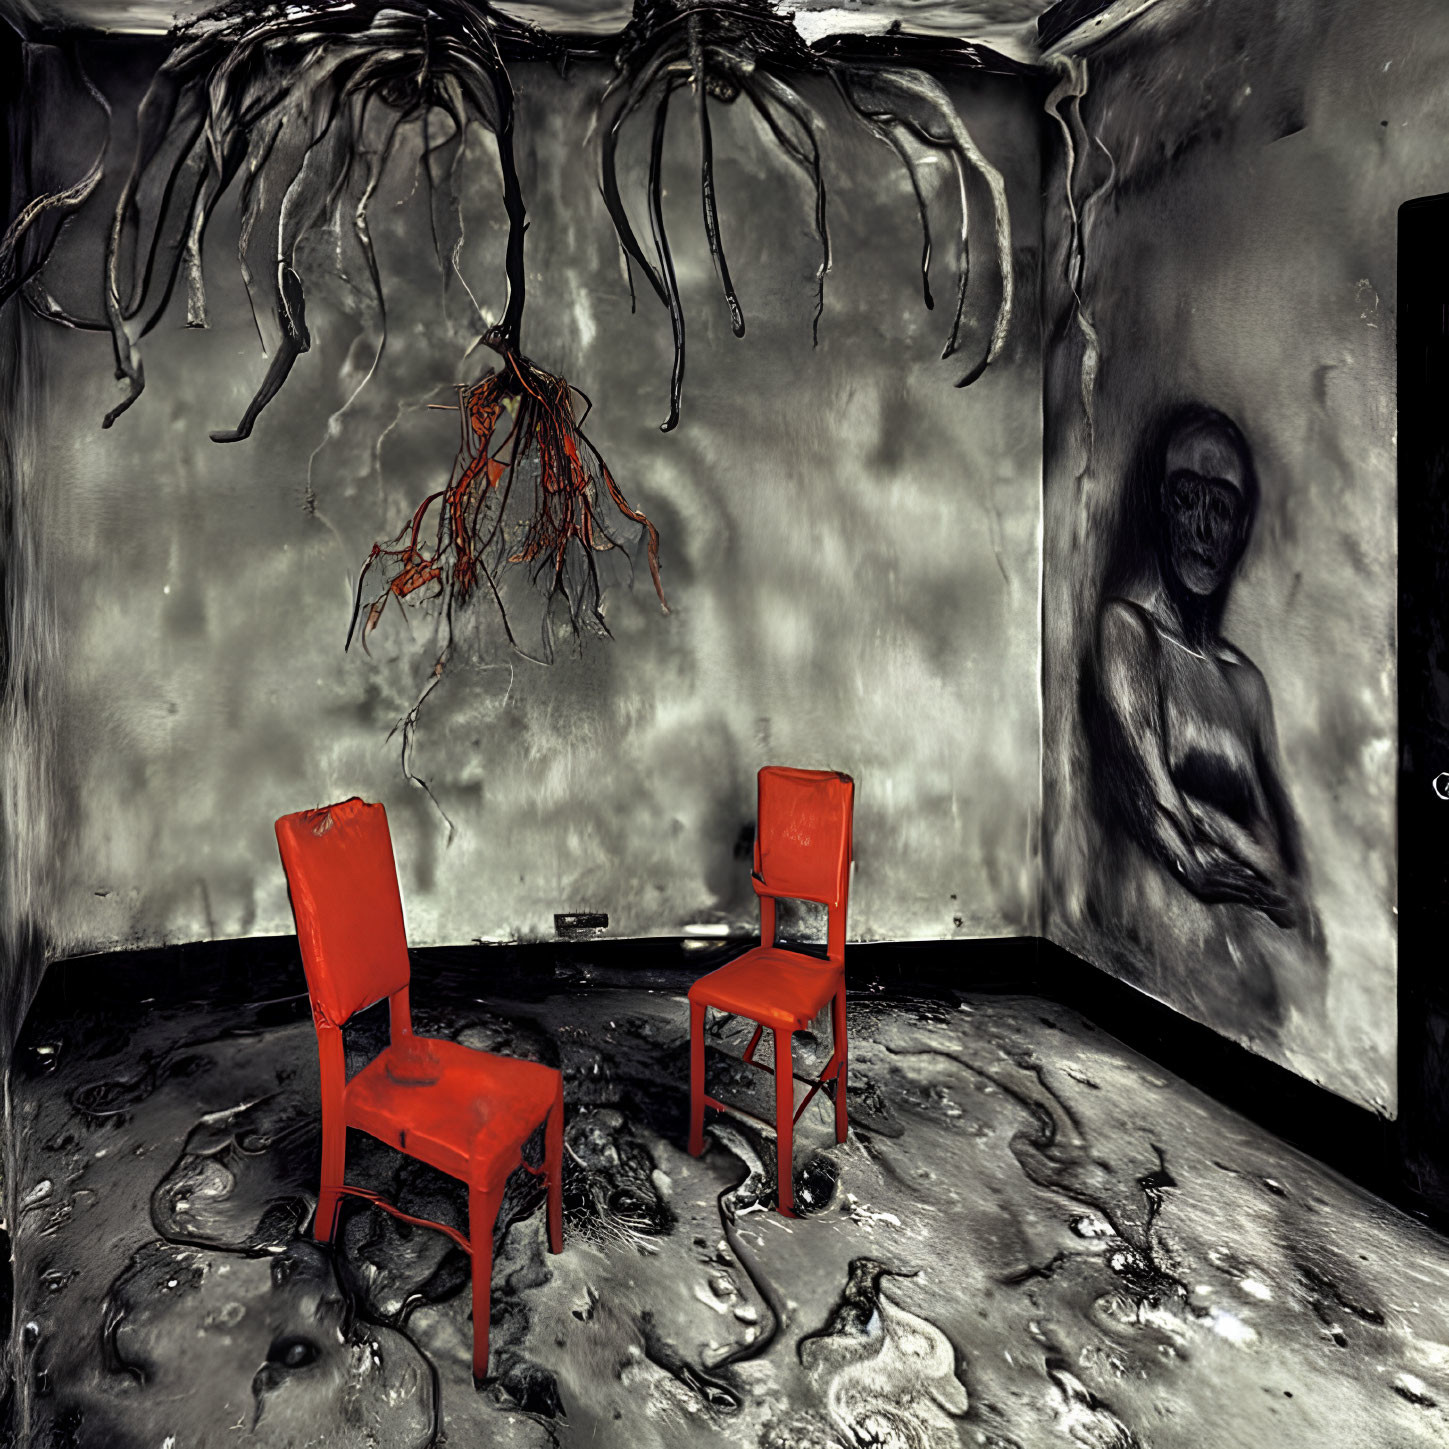 Dark Room with Red Chairs, Black Tendrils, and Creepy Sketch